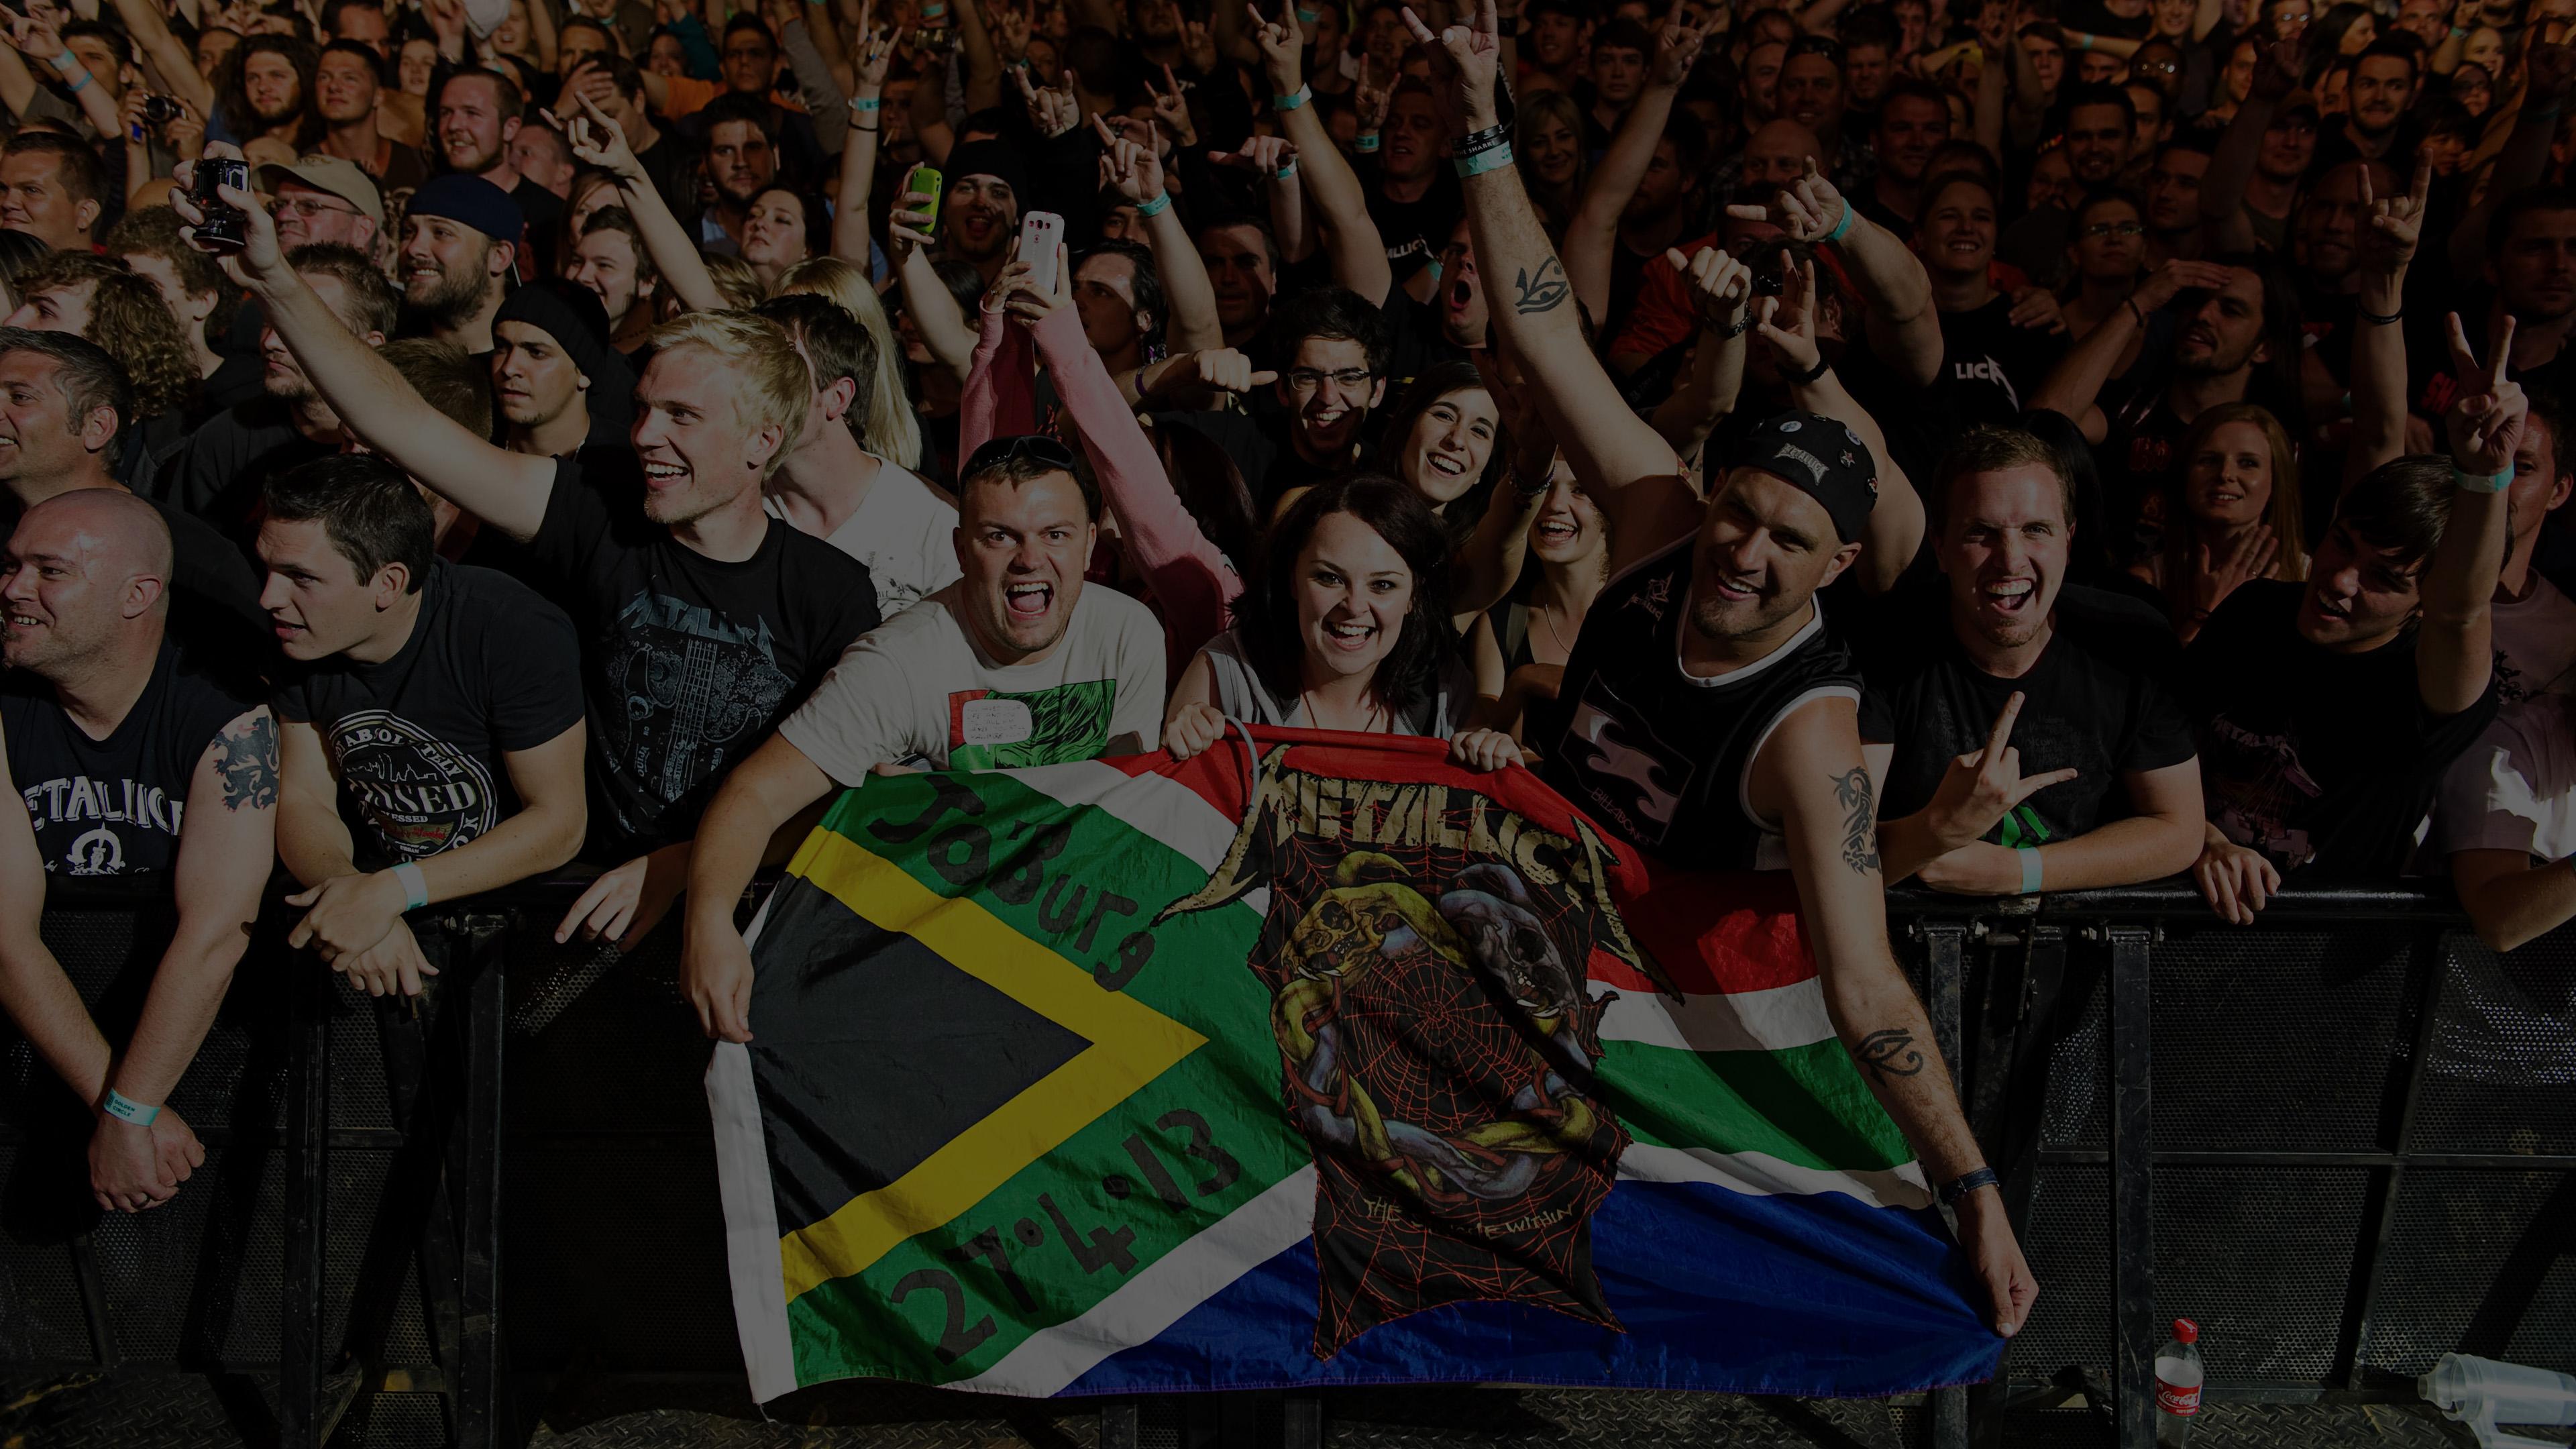 Metallica at FNB Stadium in Johannesburg, South Africa on April 27, 2013